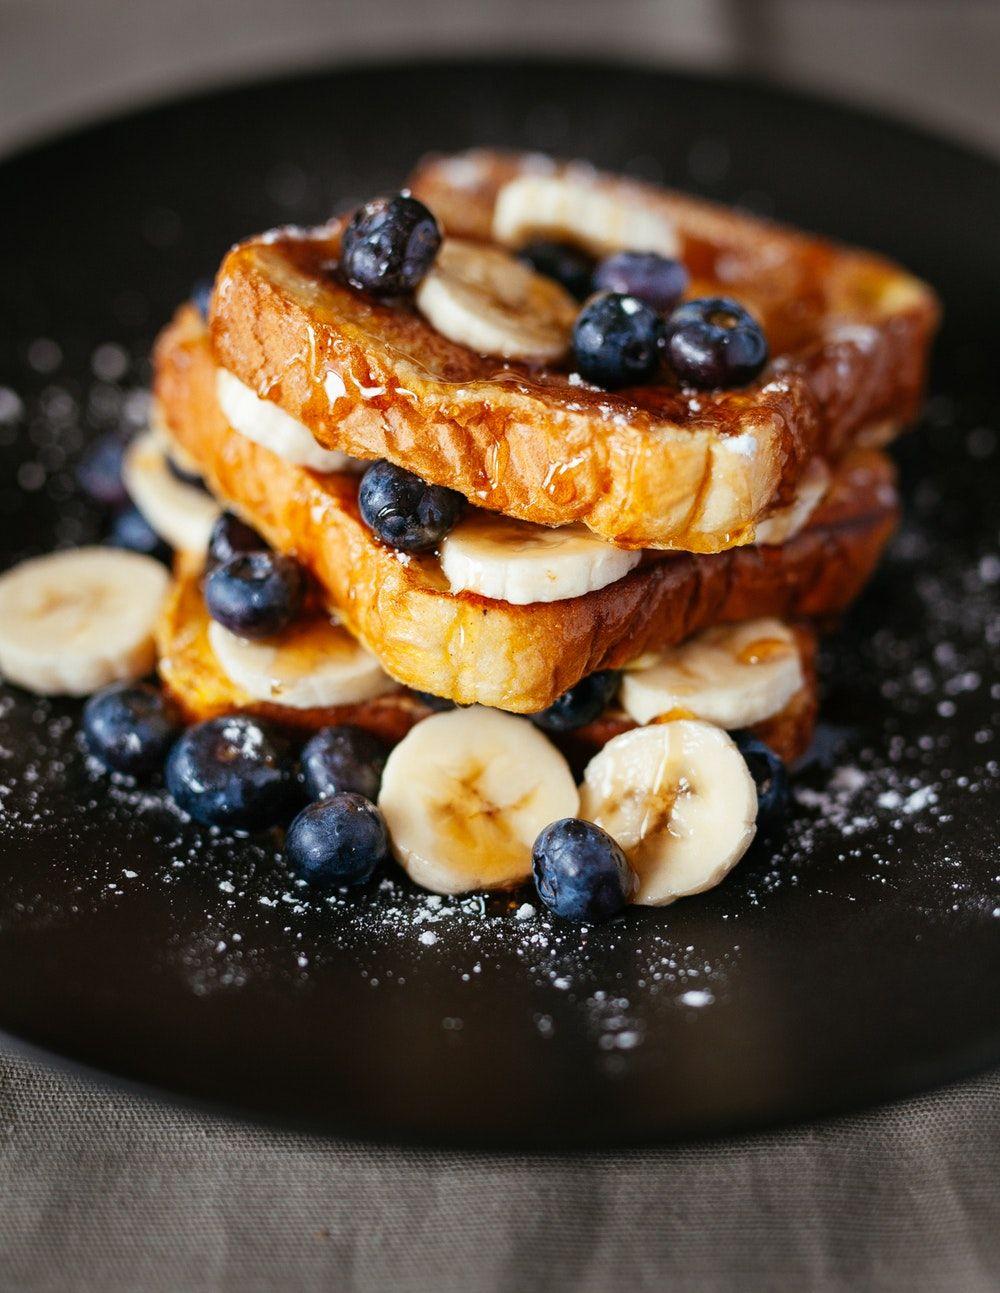 Breakfast Food Picture. Download Free Image